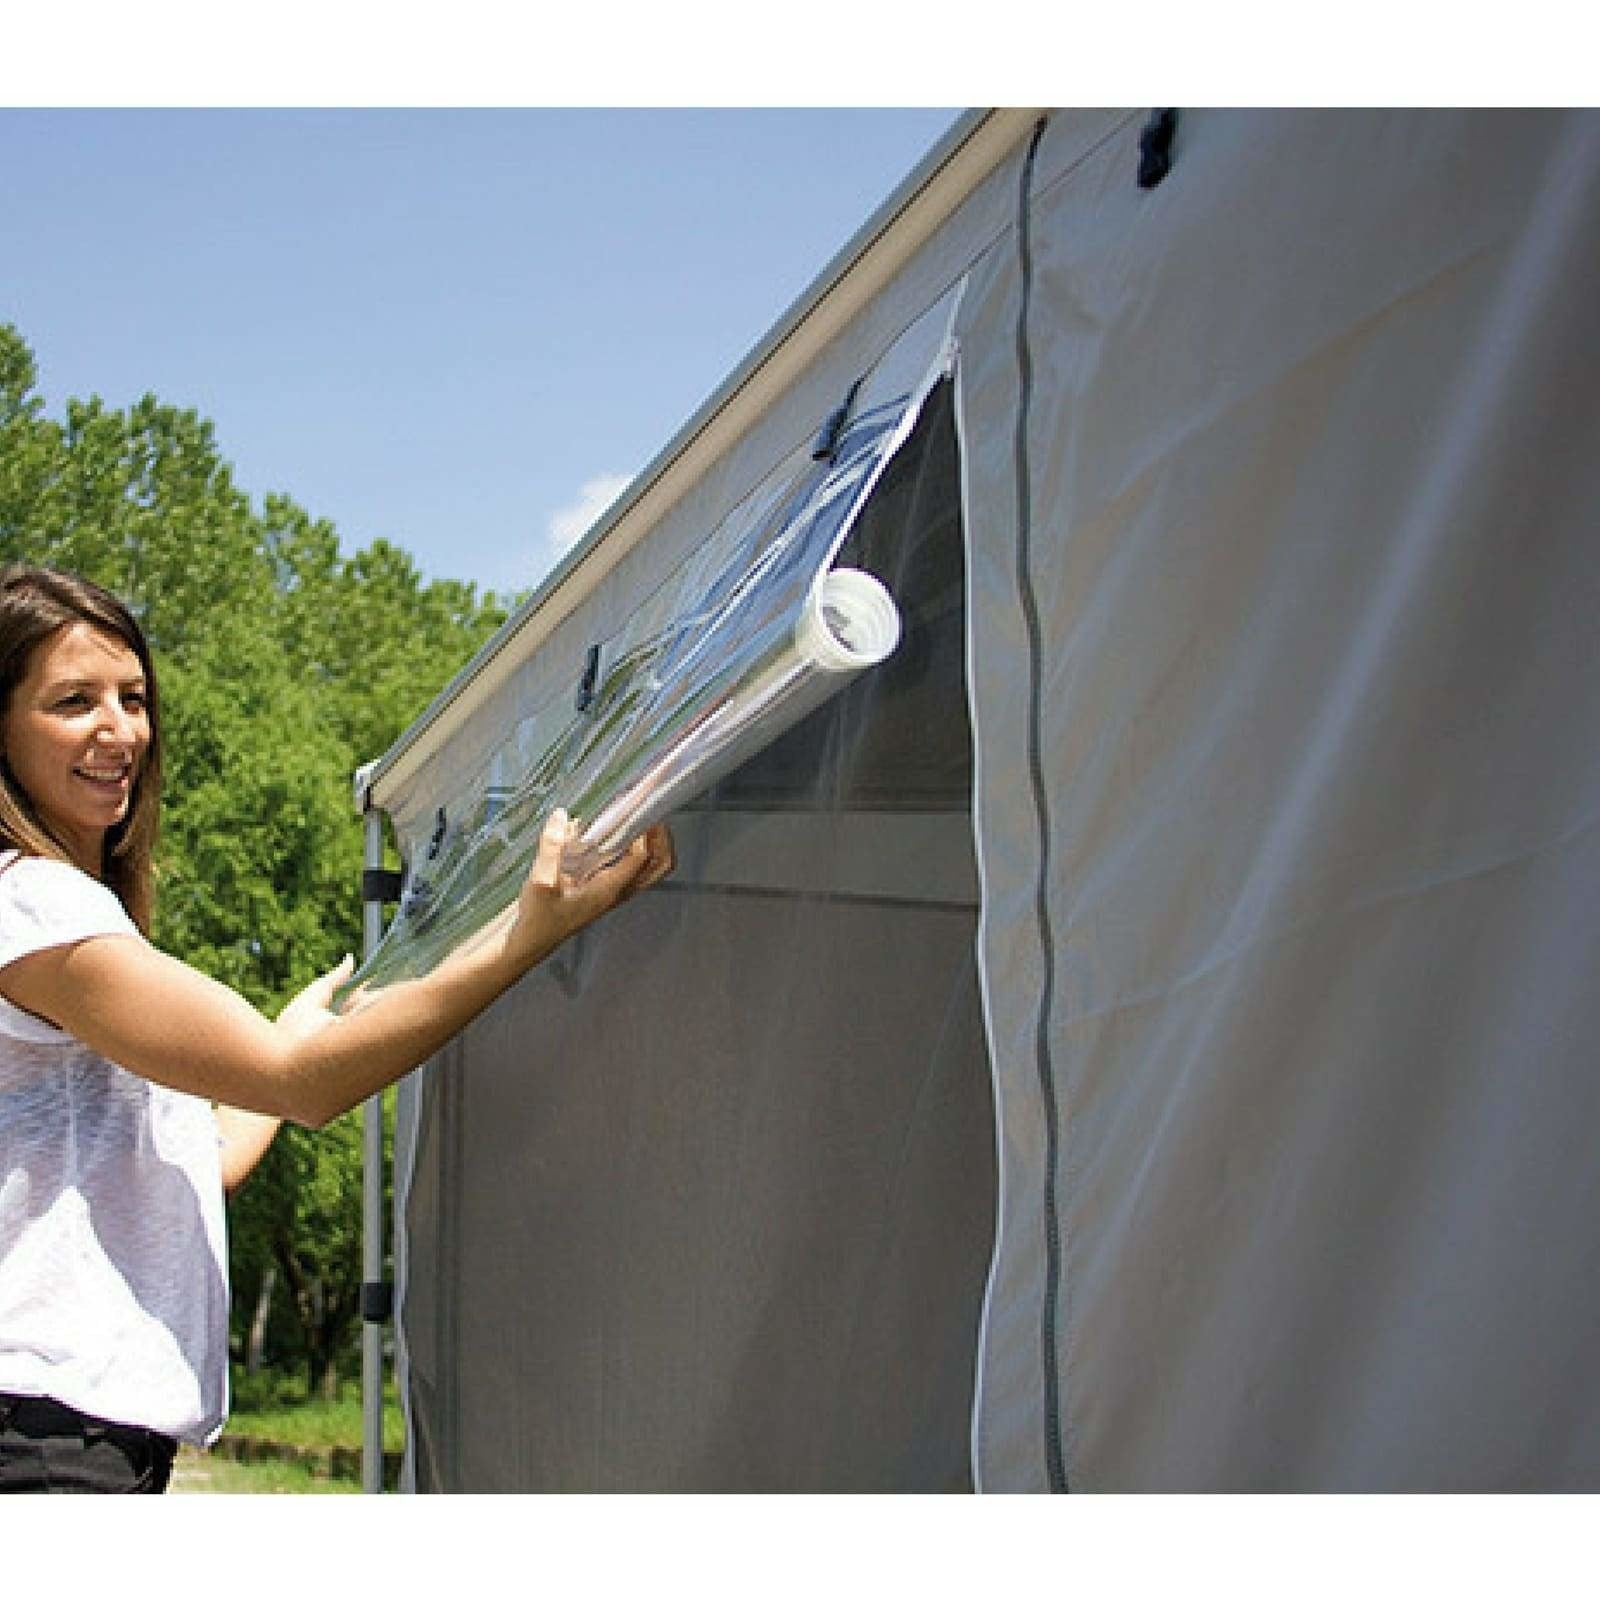 Fiamma Caravanstore Light Privacy Room made by Fiamma. A Tent sold by Quality Caravan Awnings